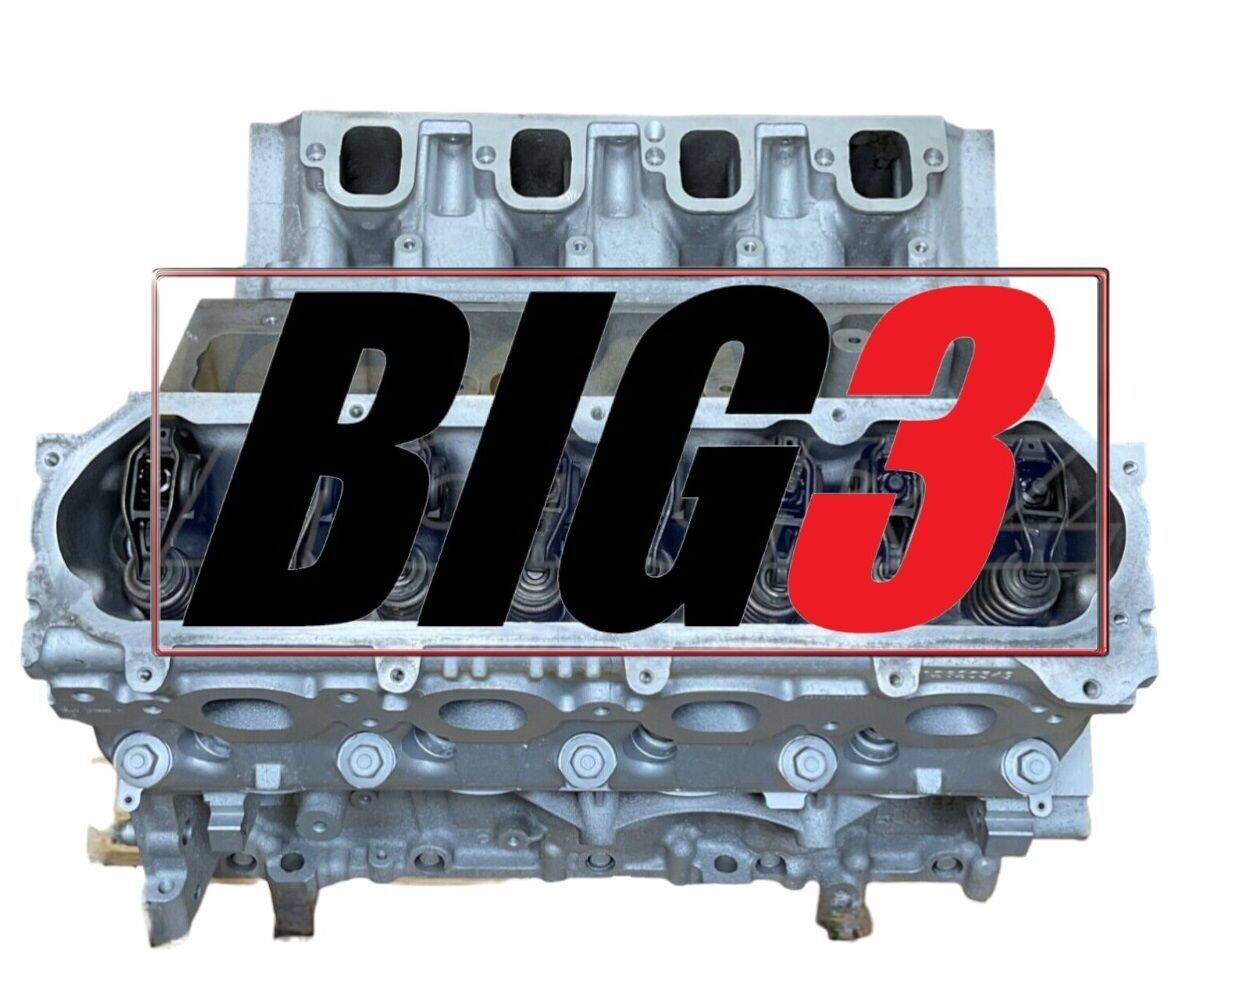 L83 GEN V ECOTEC3 5.3 ENGINE LONG BLOCK ASSEMBLY
2014 AND UP GM CHEVROLET 4 YEAR WARRANTY